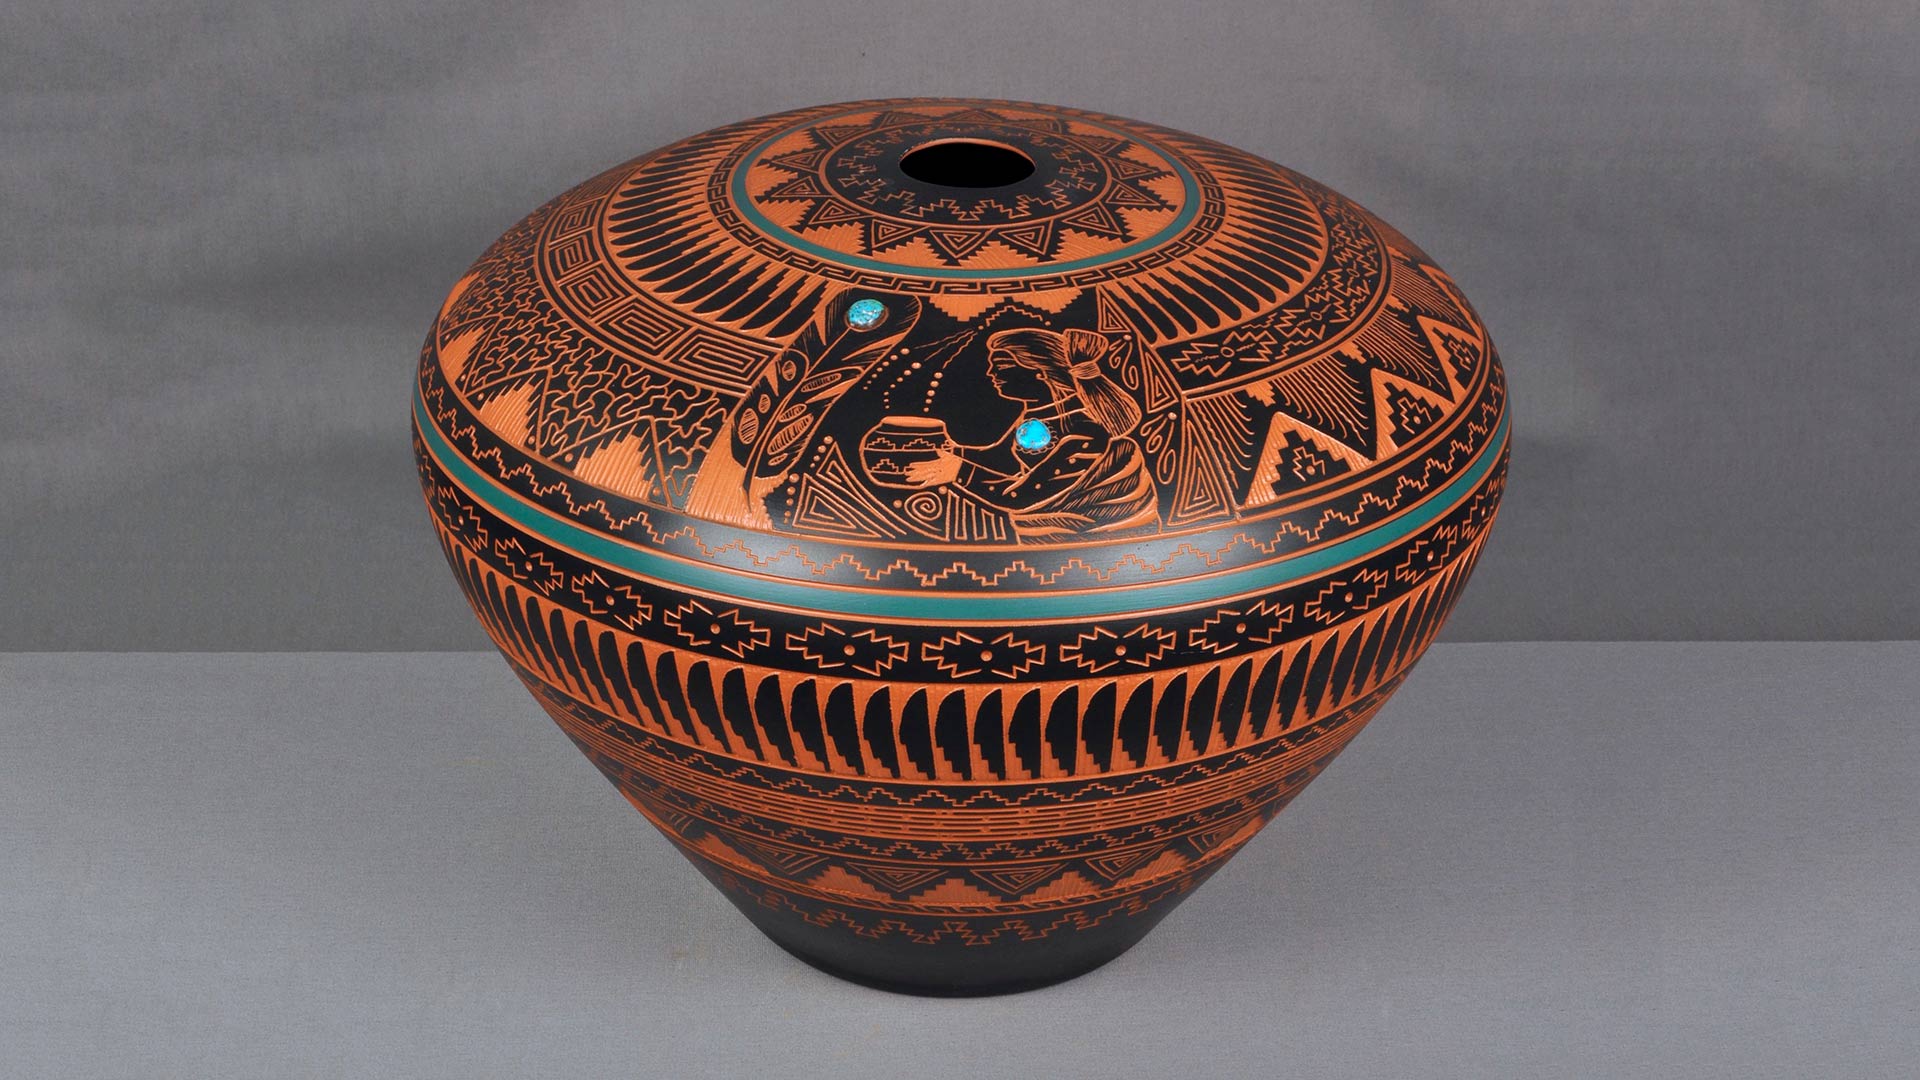 An orange clay vessel decorated with intricate black and turquoise patterns.